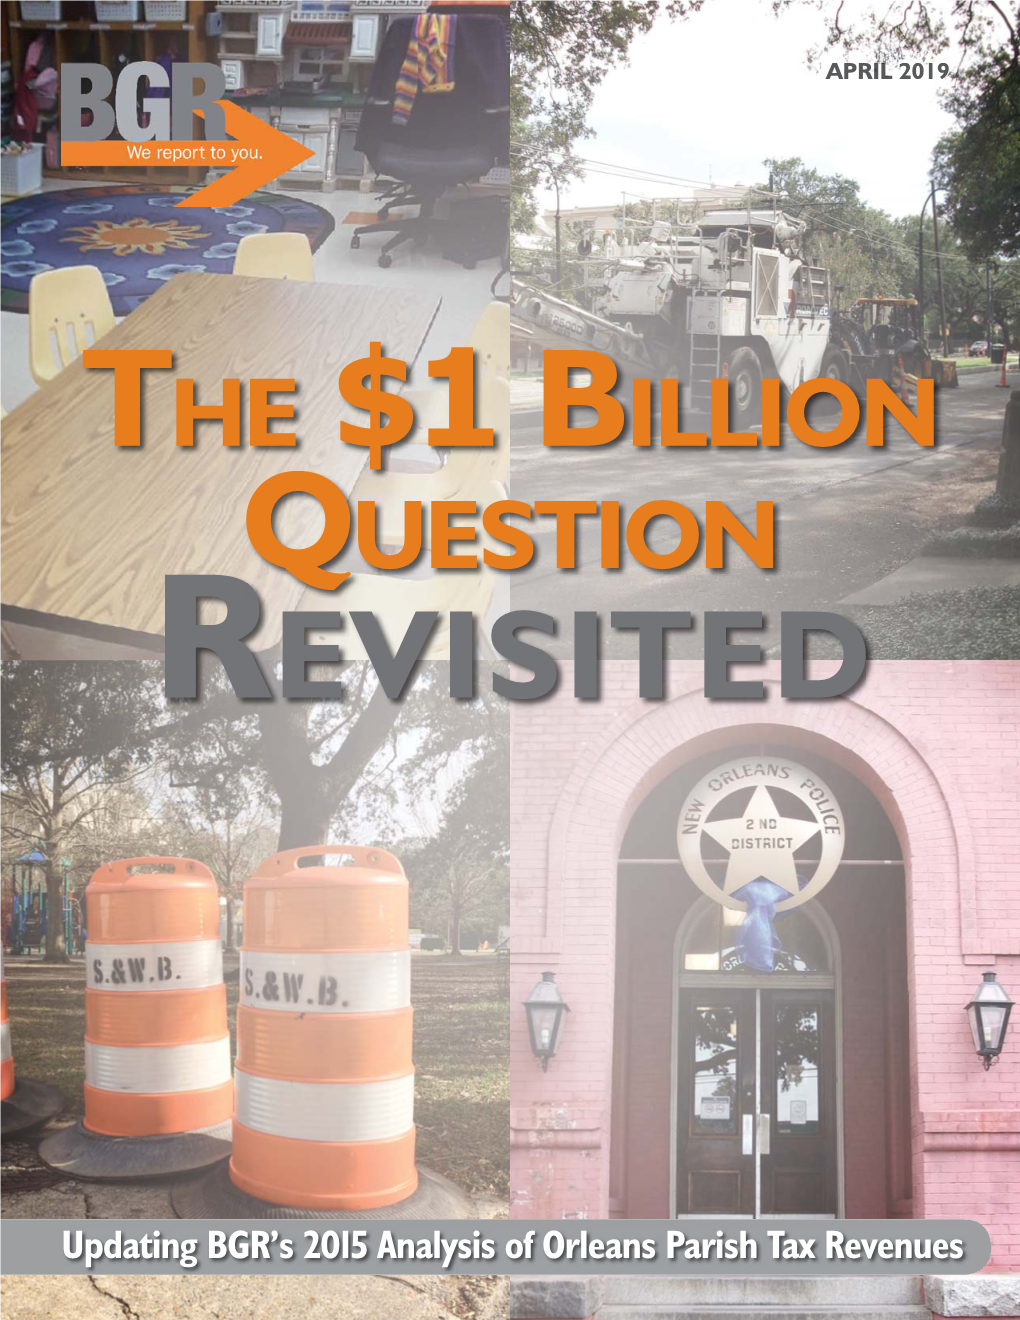 The $1 Billion Question Revisited